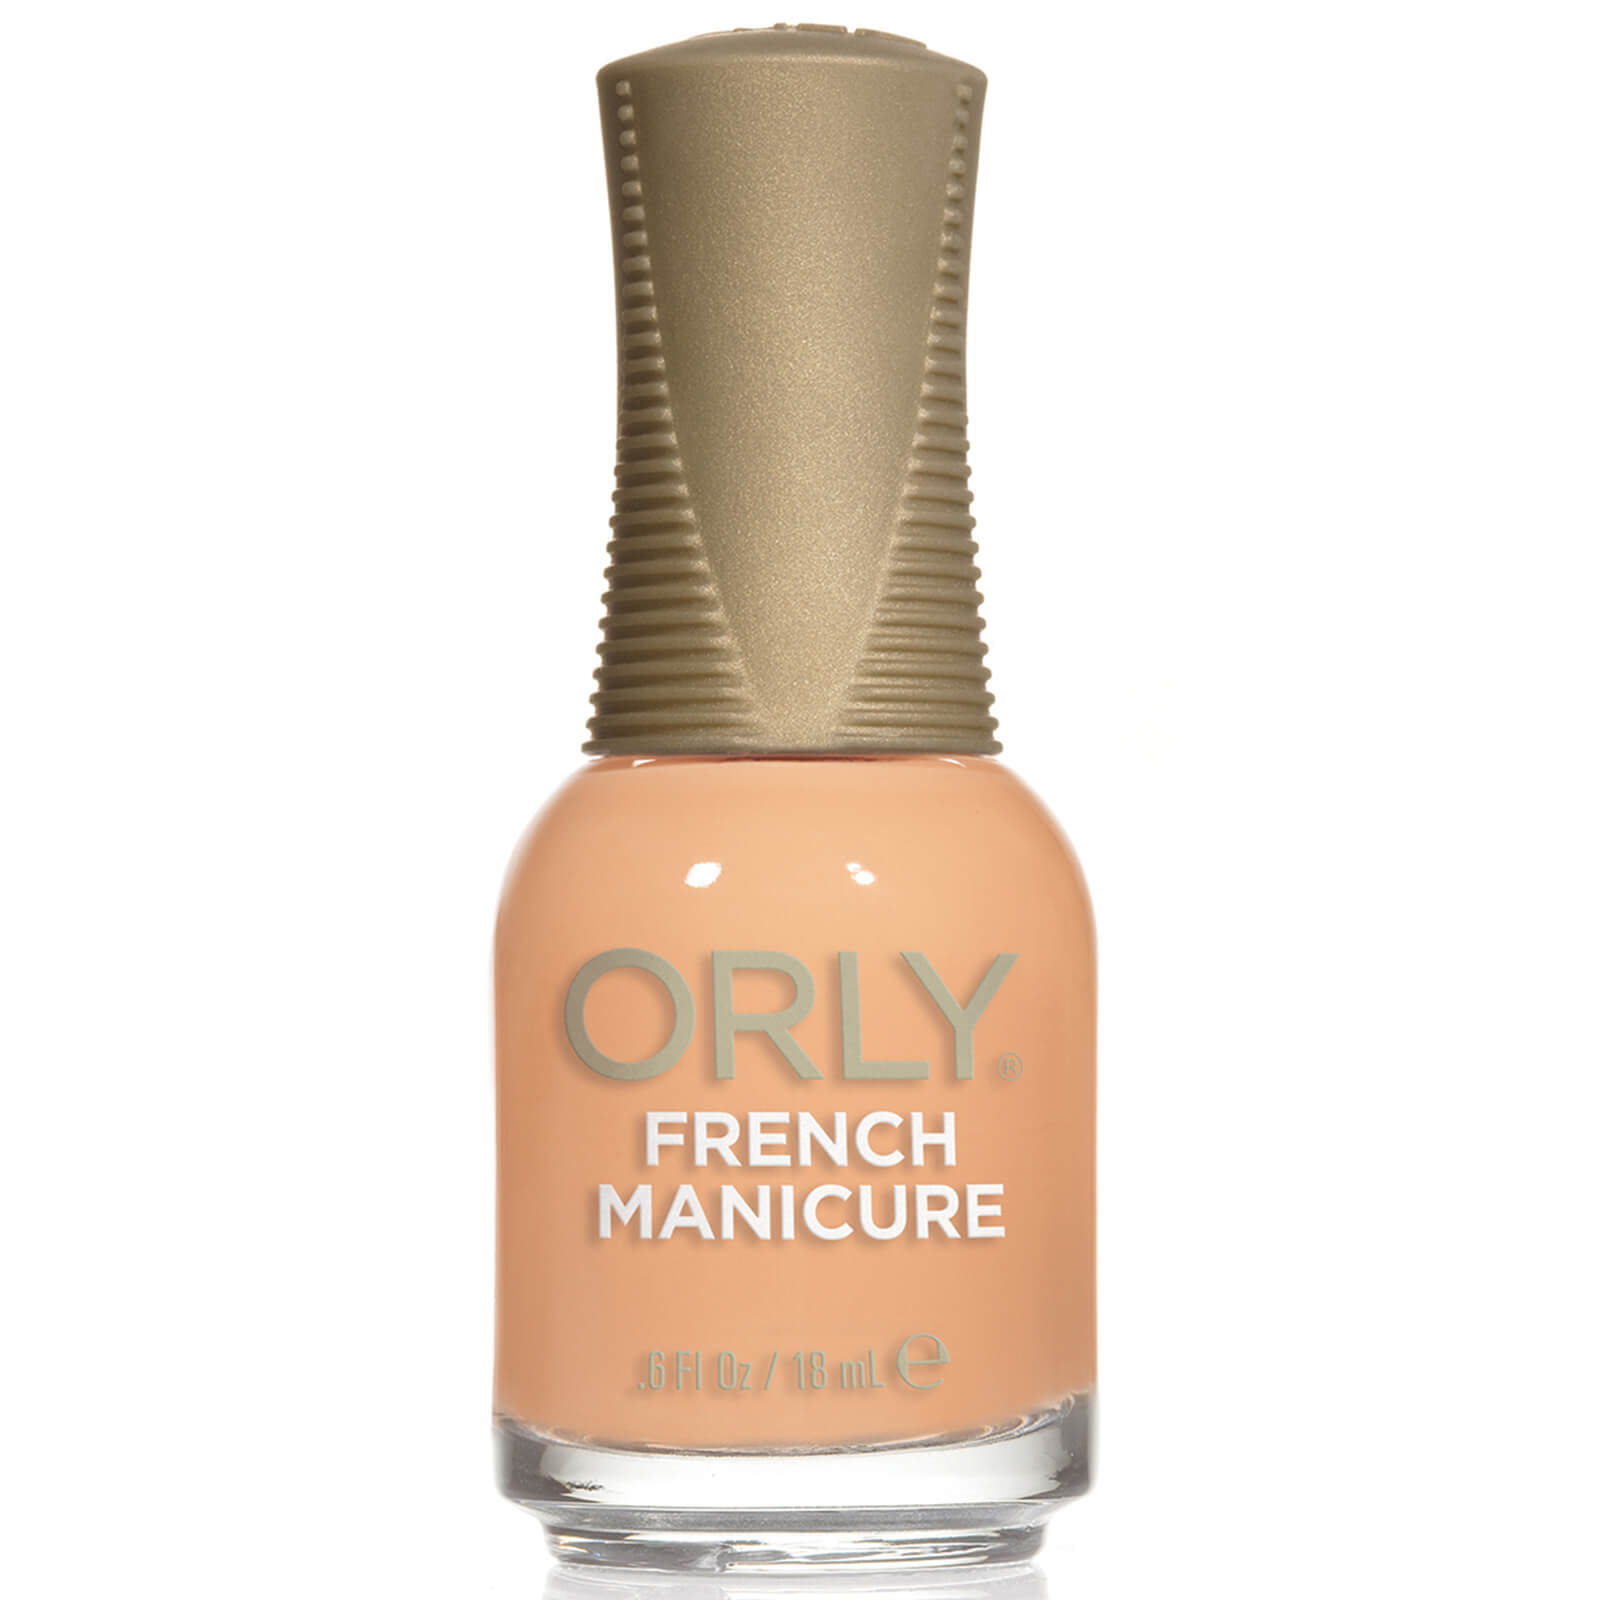 Orly Nail Lacquer French Manicure 18ml (Various Shades) – Sheer Nude lookfantastic.com imagine